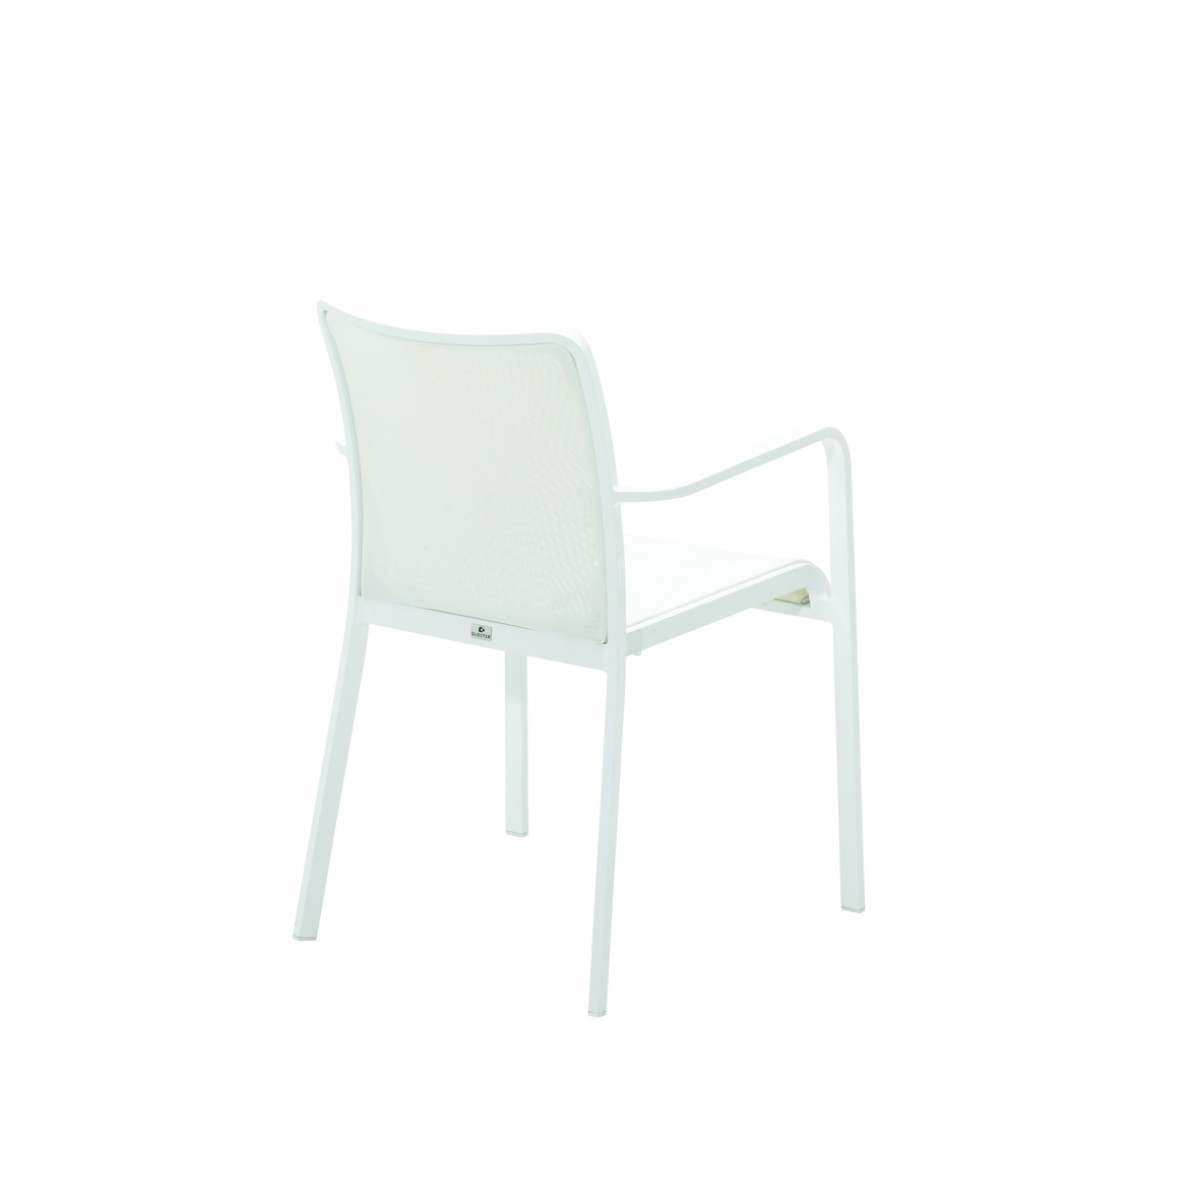 Gloster - Riva Stacking Chair w/Arms (Crystal White/White)